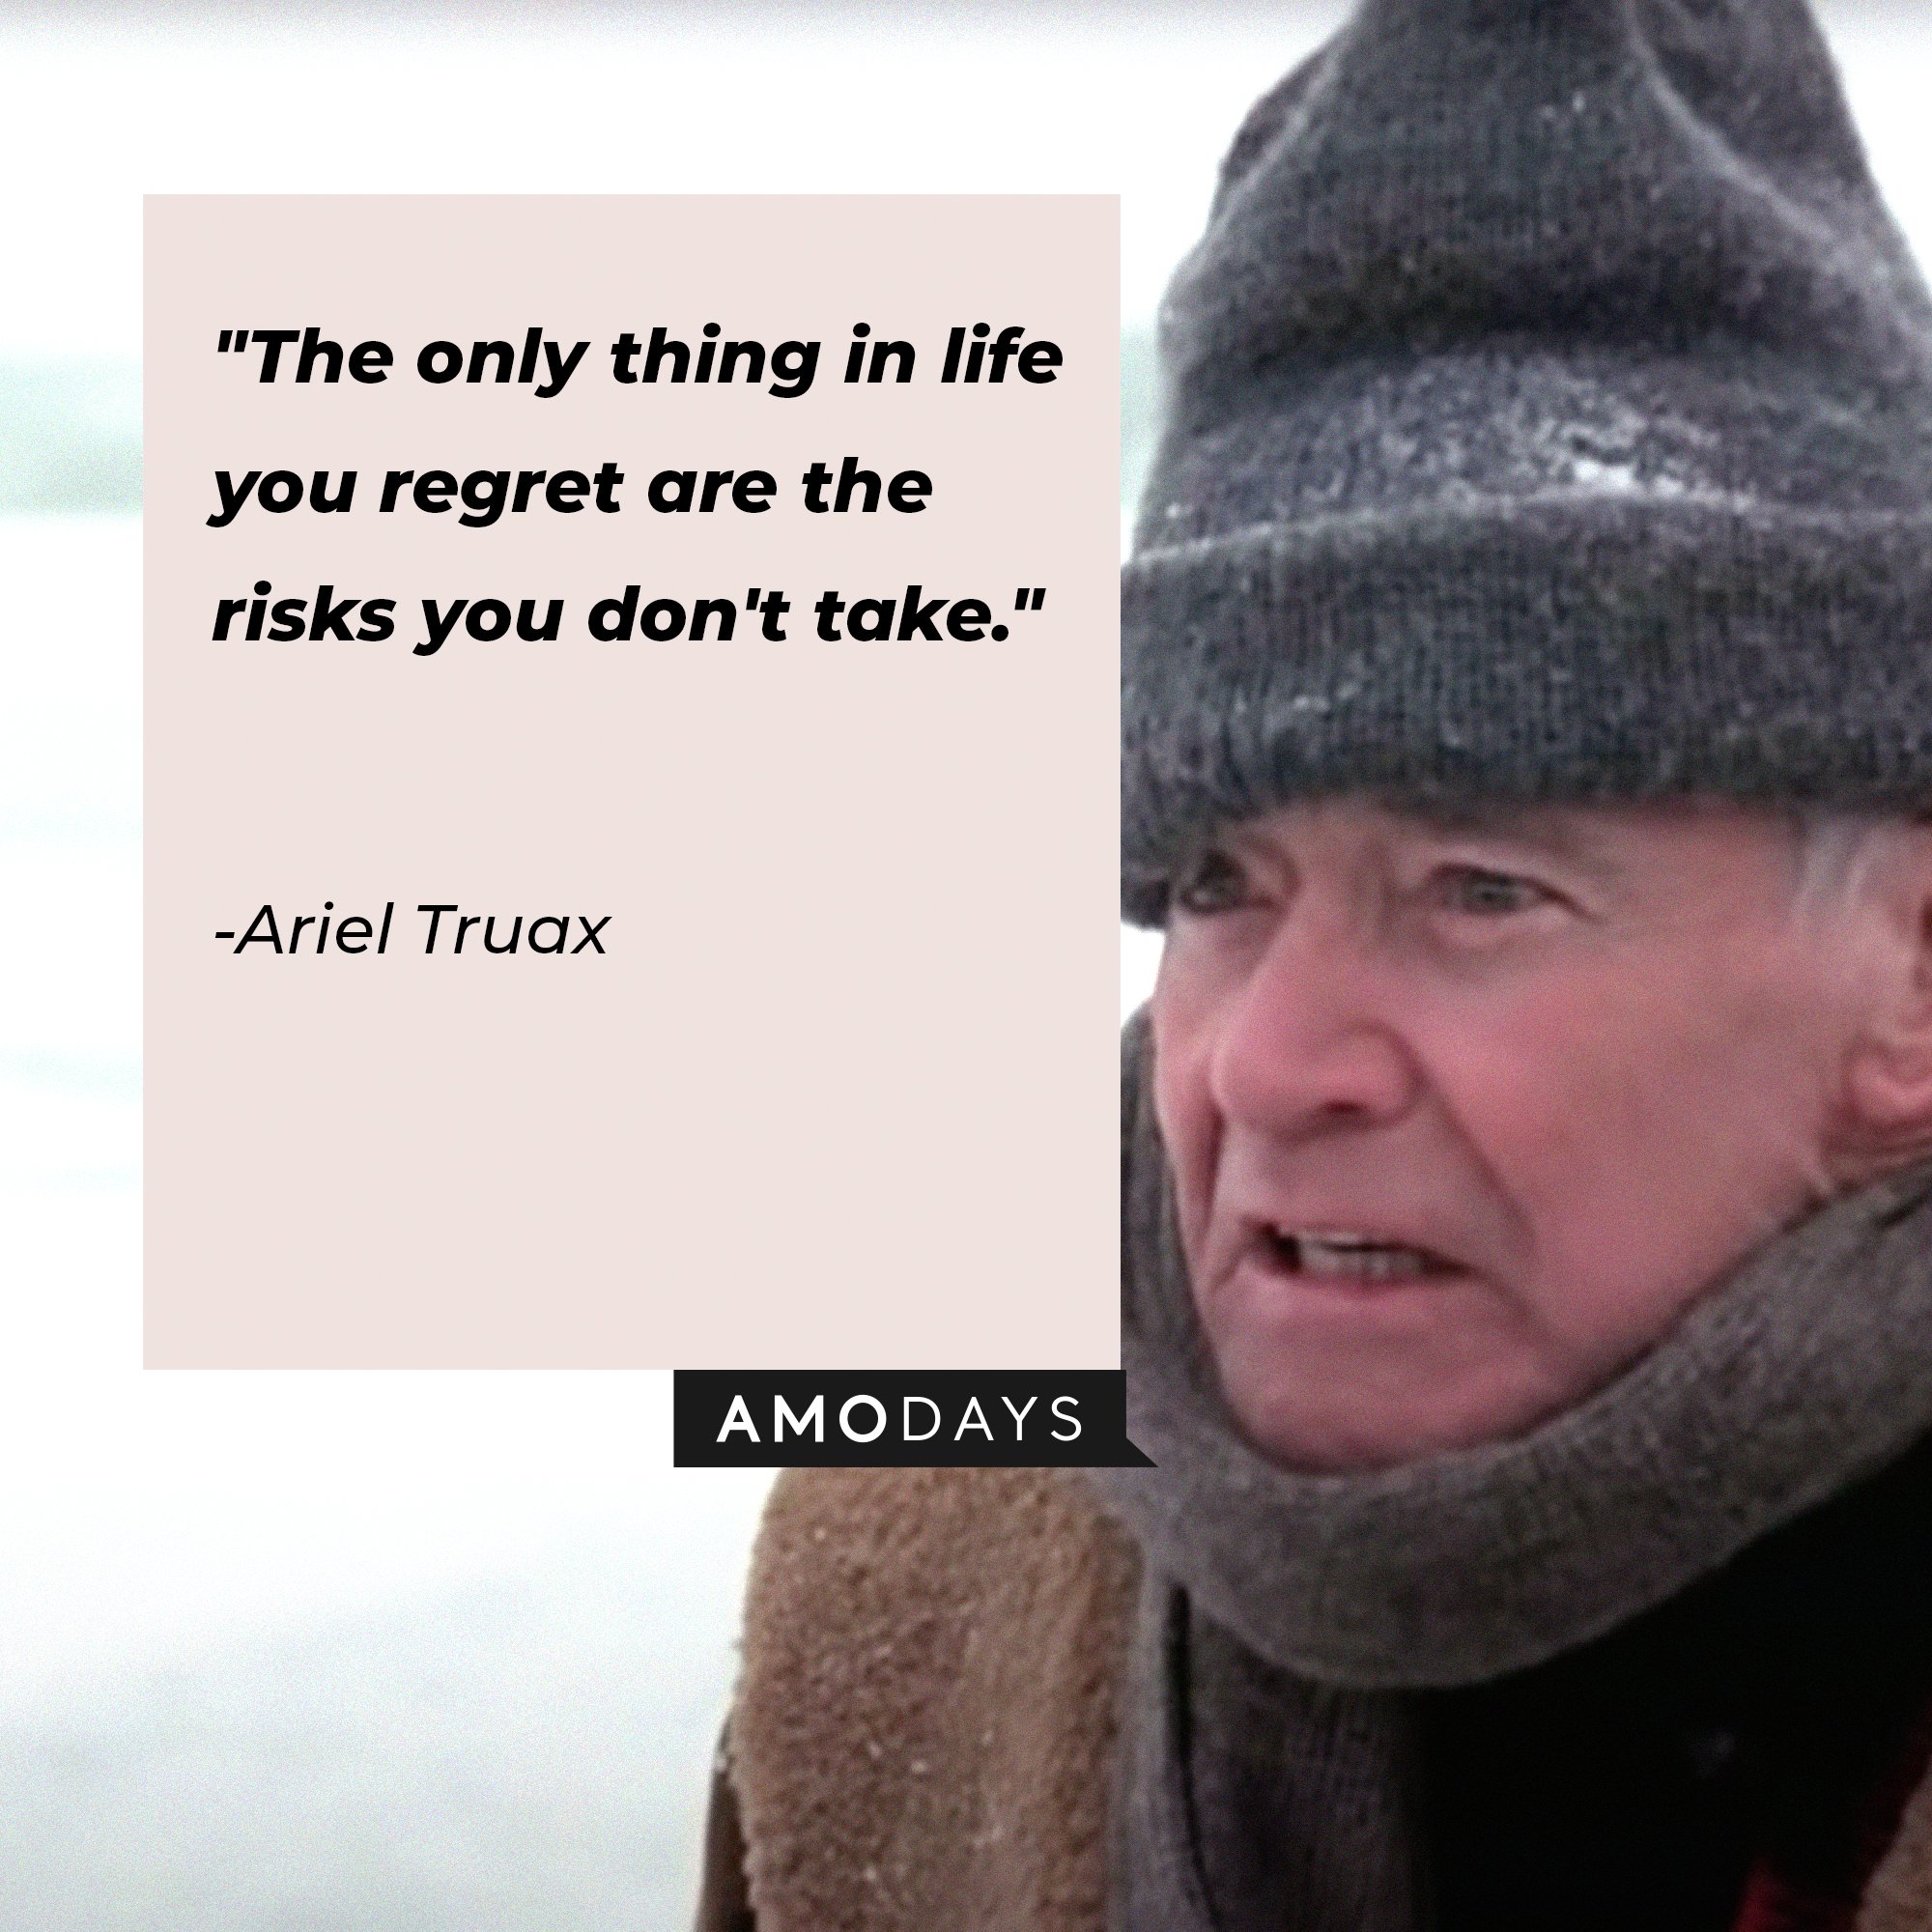 Ariel Truax’s quote: "The only thing in life you regret are the risks you don't take." | Image: AmoDays